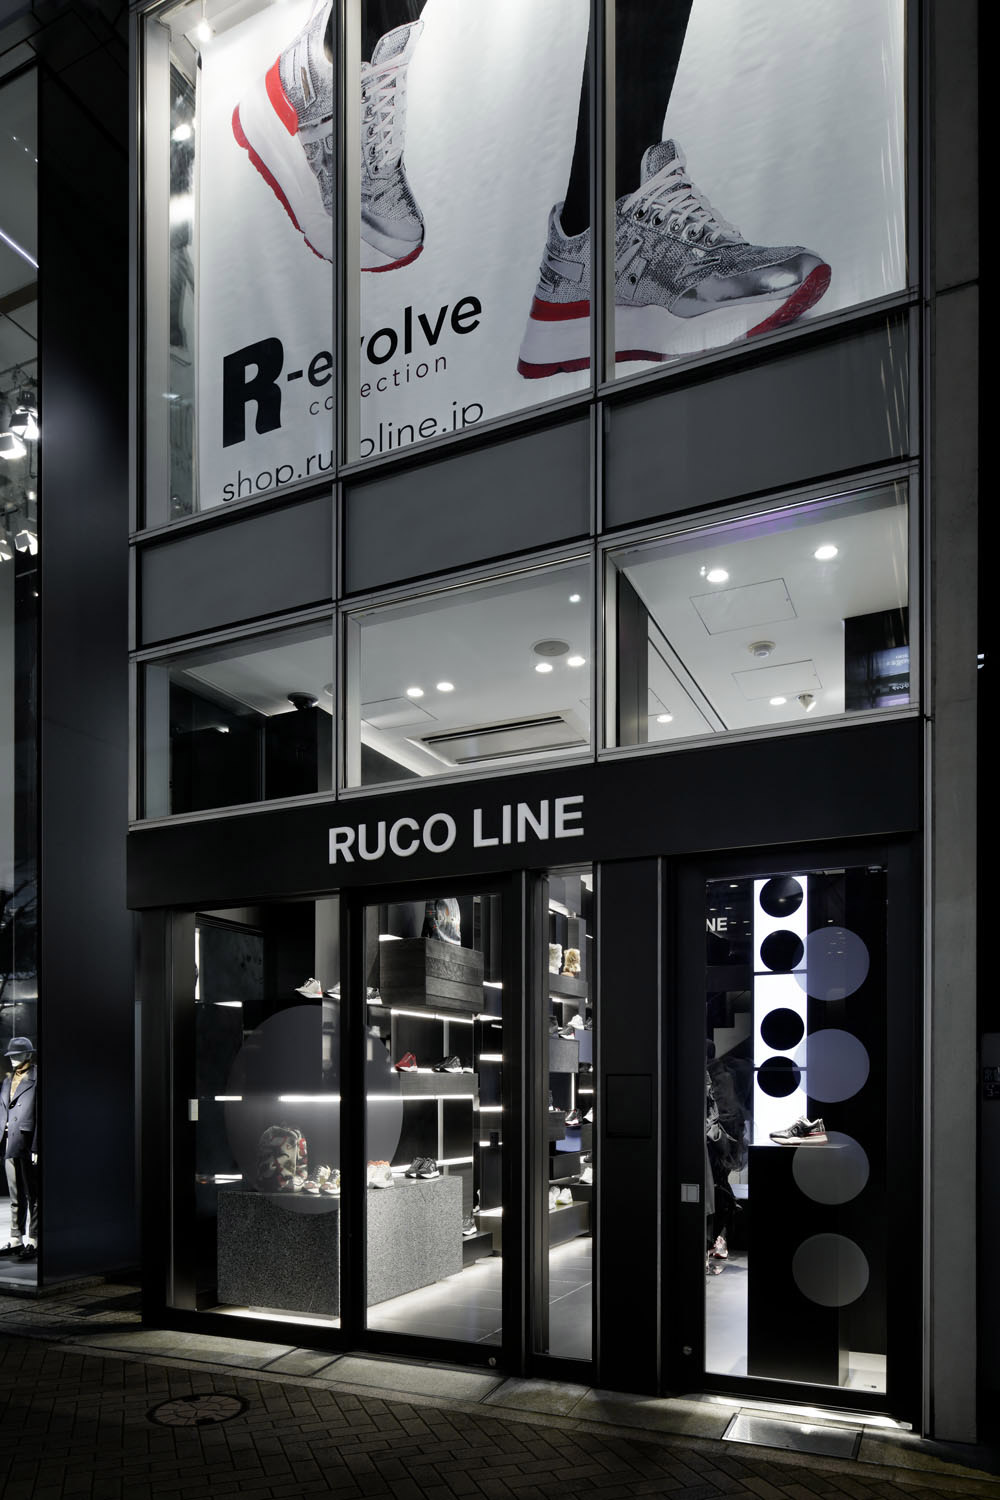 RUCO LINE